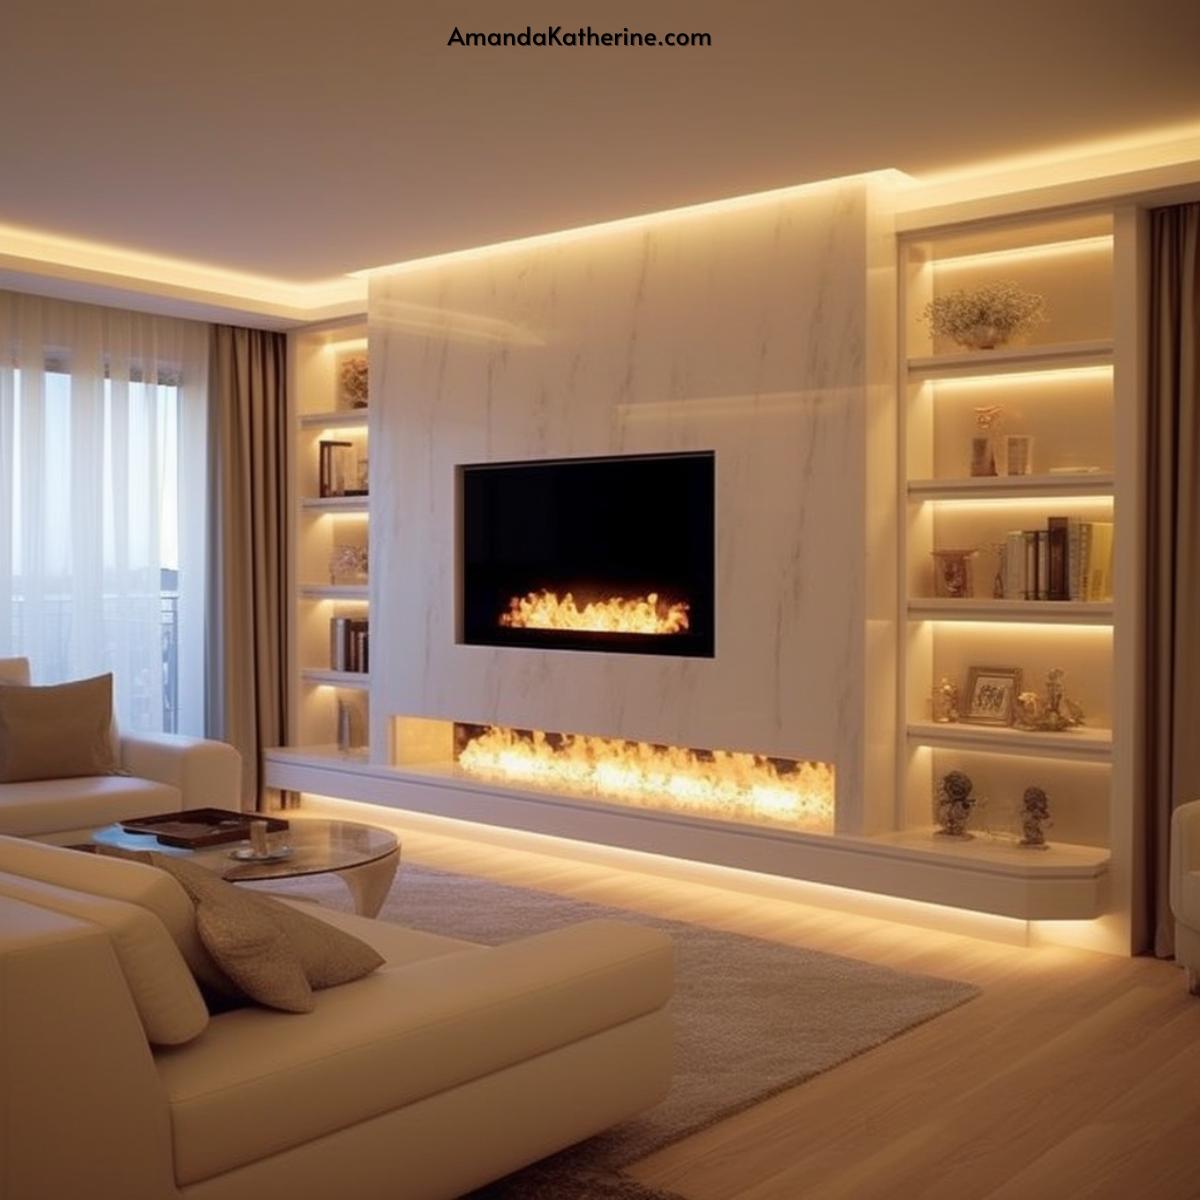 31 Stunning Fireplace Wall Ideas with a TV for Your Living Room | bumped out fireplace with white marble